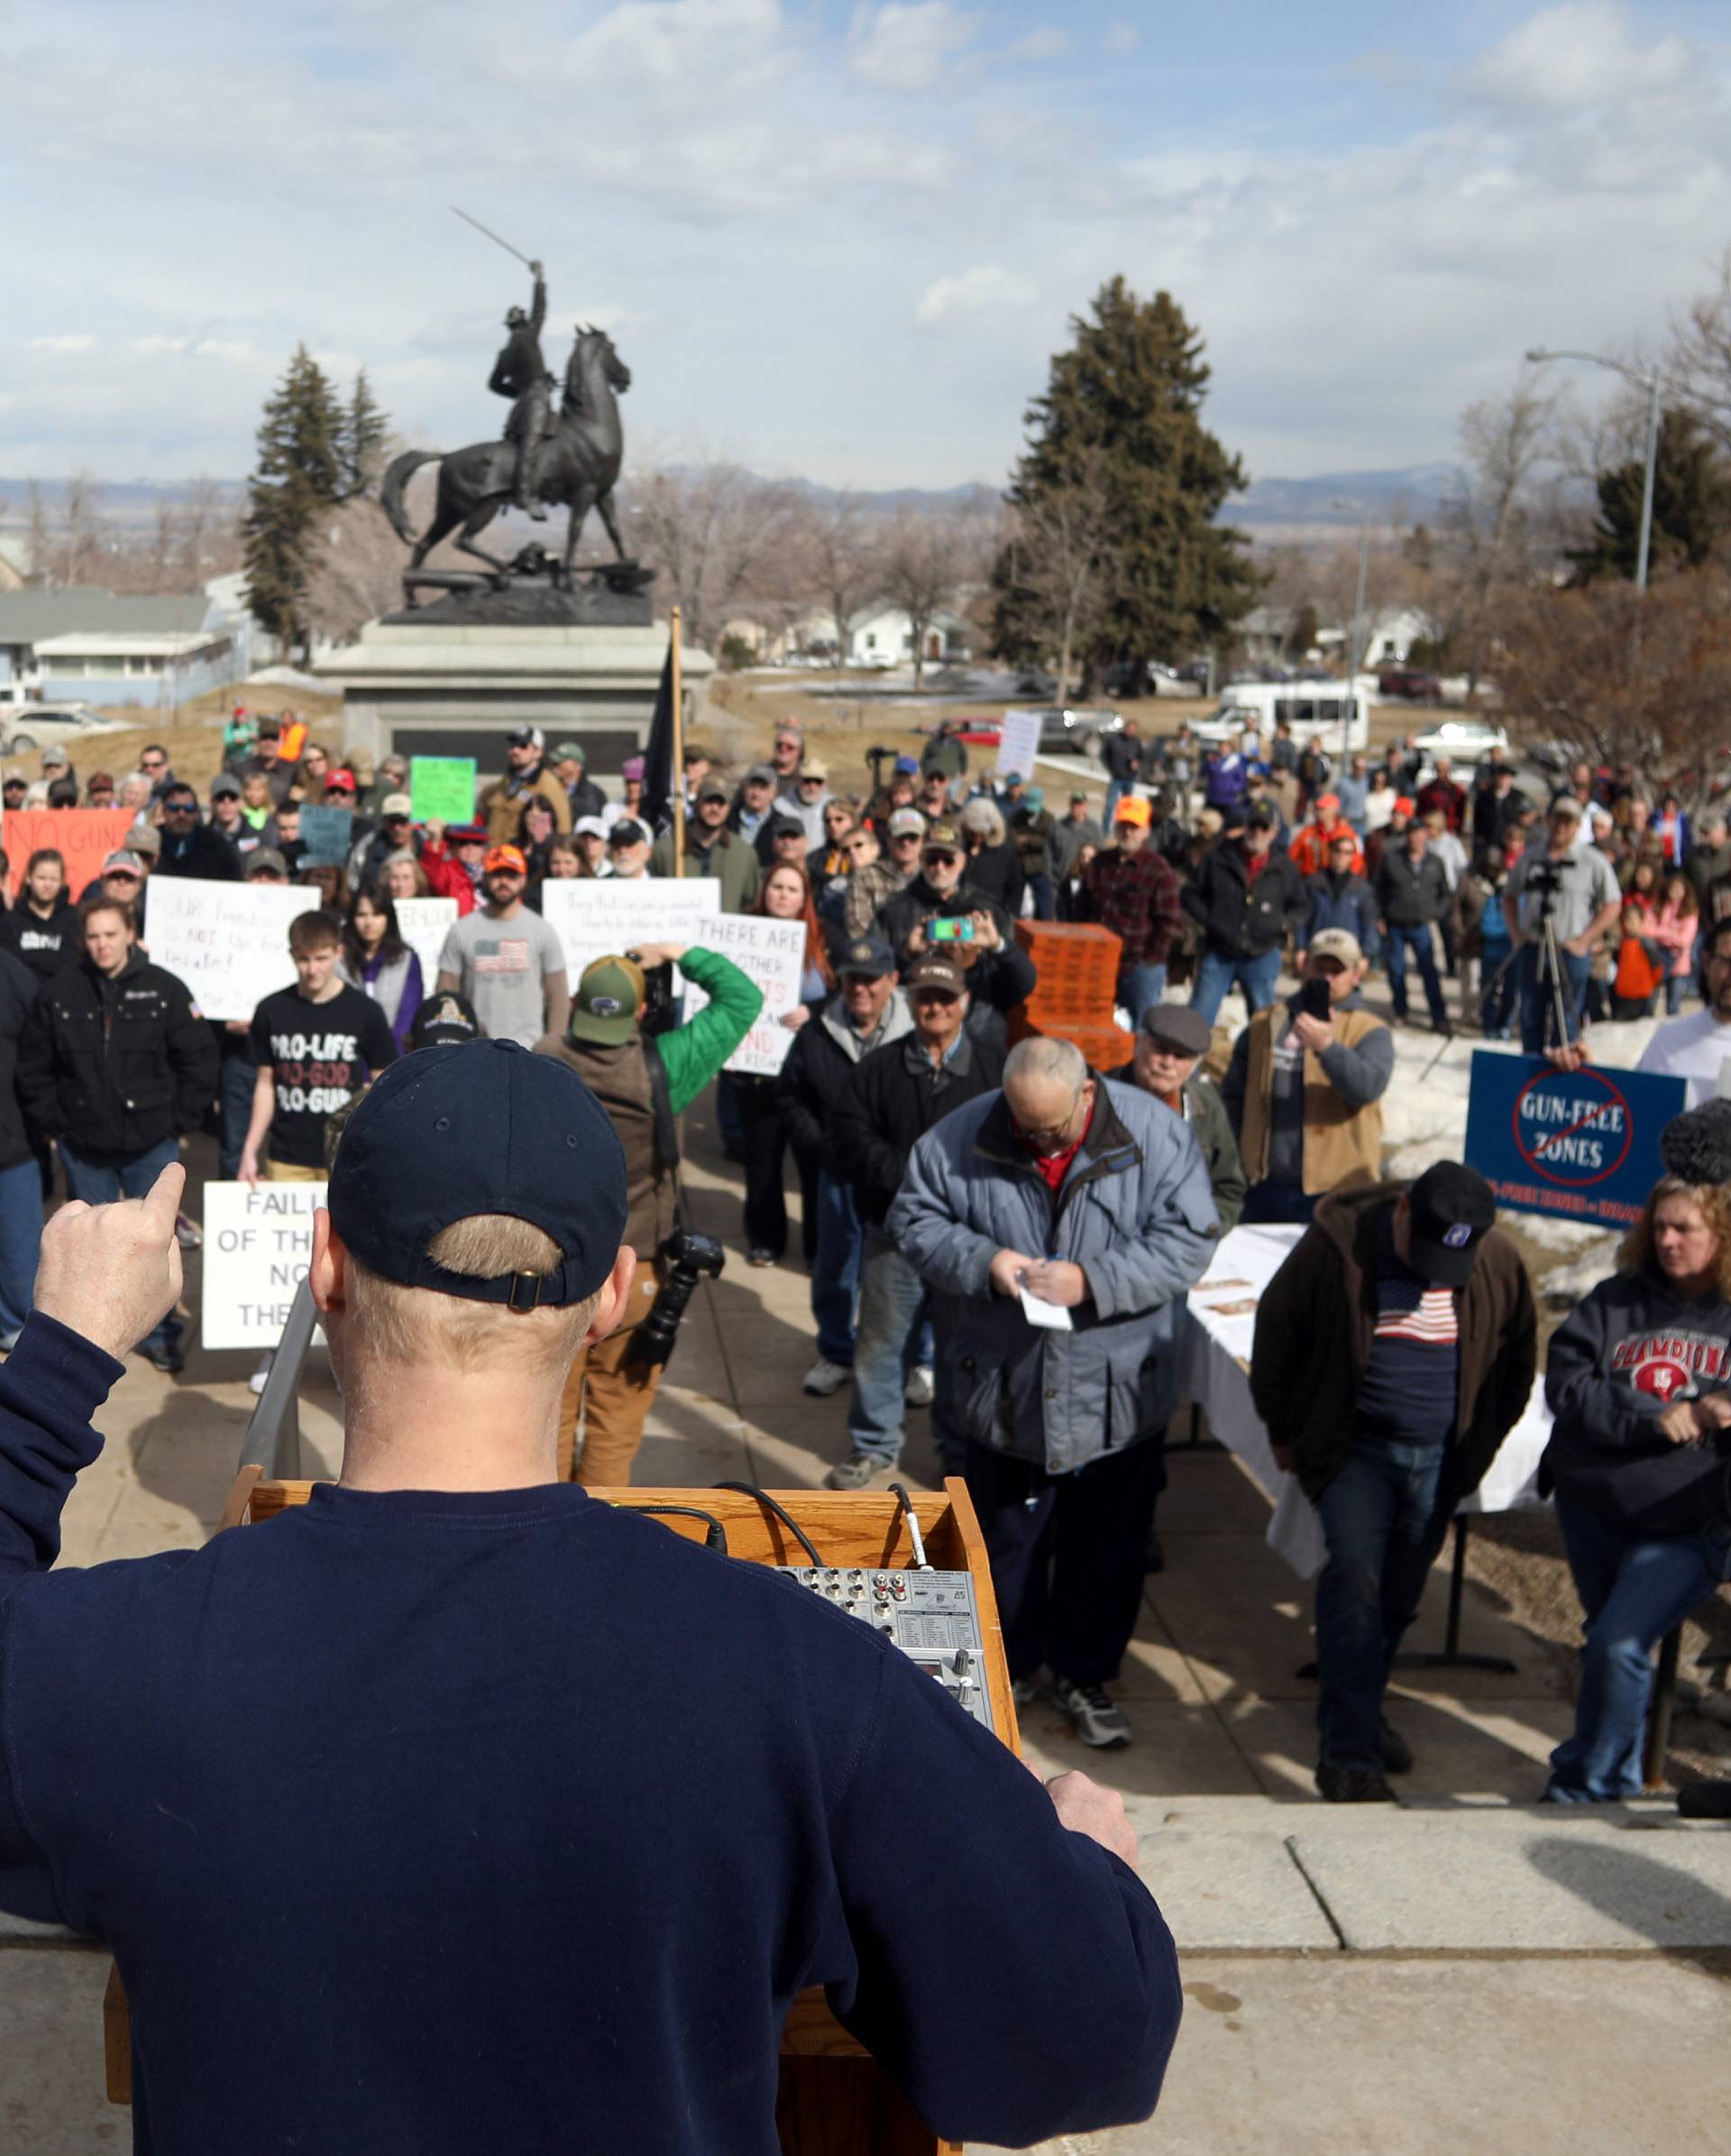 Organizer Brent Webber talks to the attendees during the "March For Our Guns" rally at the state capitol in Helena, Montana